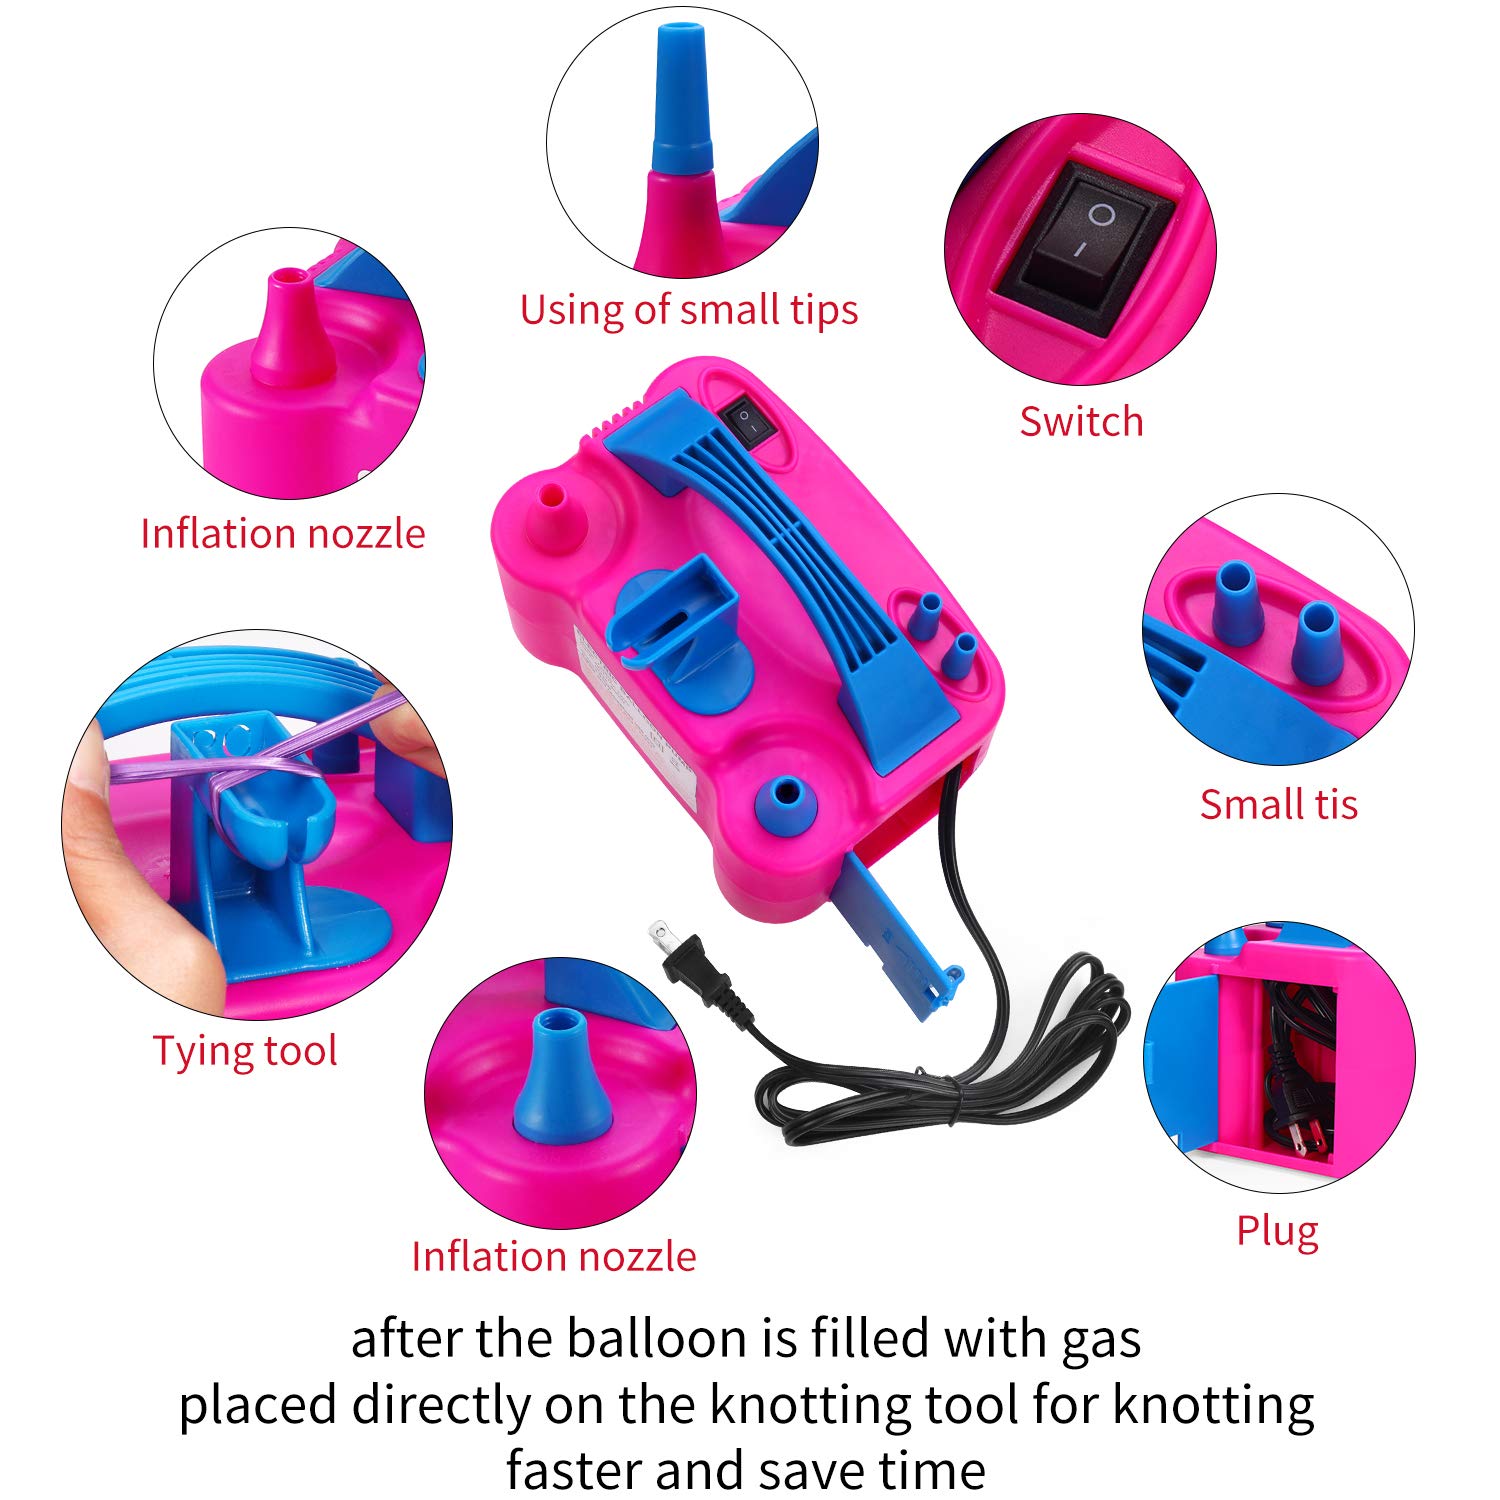 PCFING Electric Air Balloon Pump and Tying Tool in One, Portable Dual Nozzle Electric Blower Air Pump Inflator for Decoration, Party and Save Time